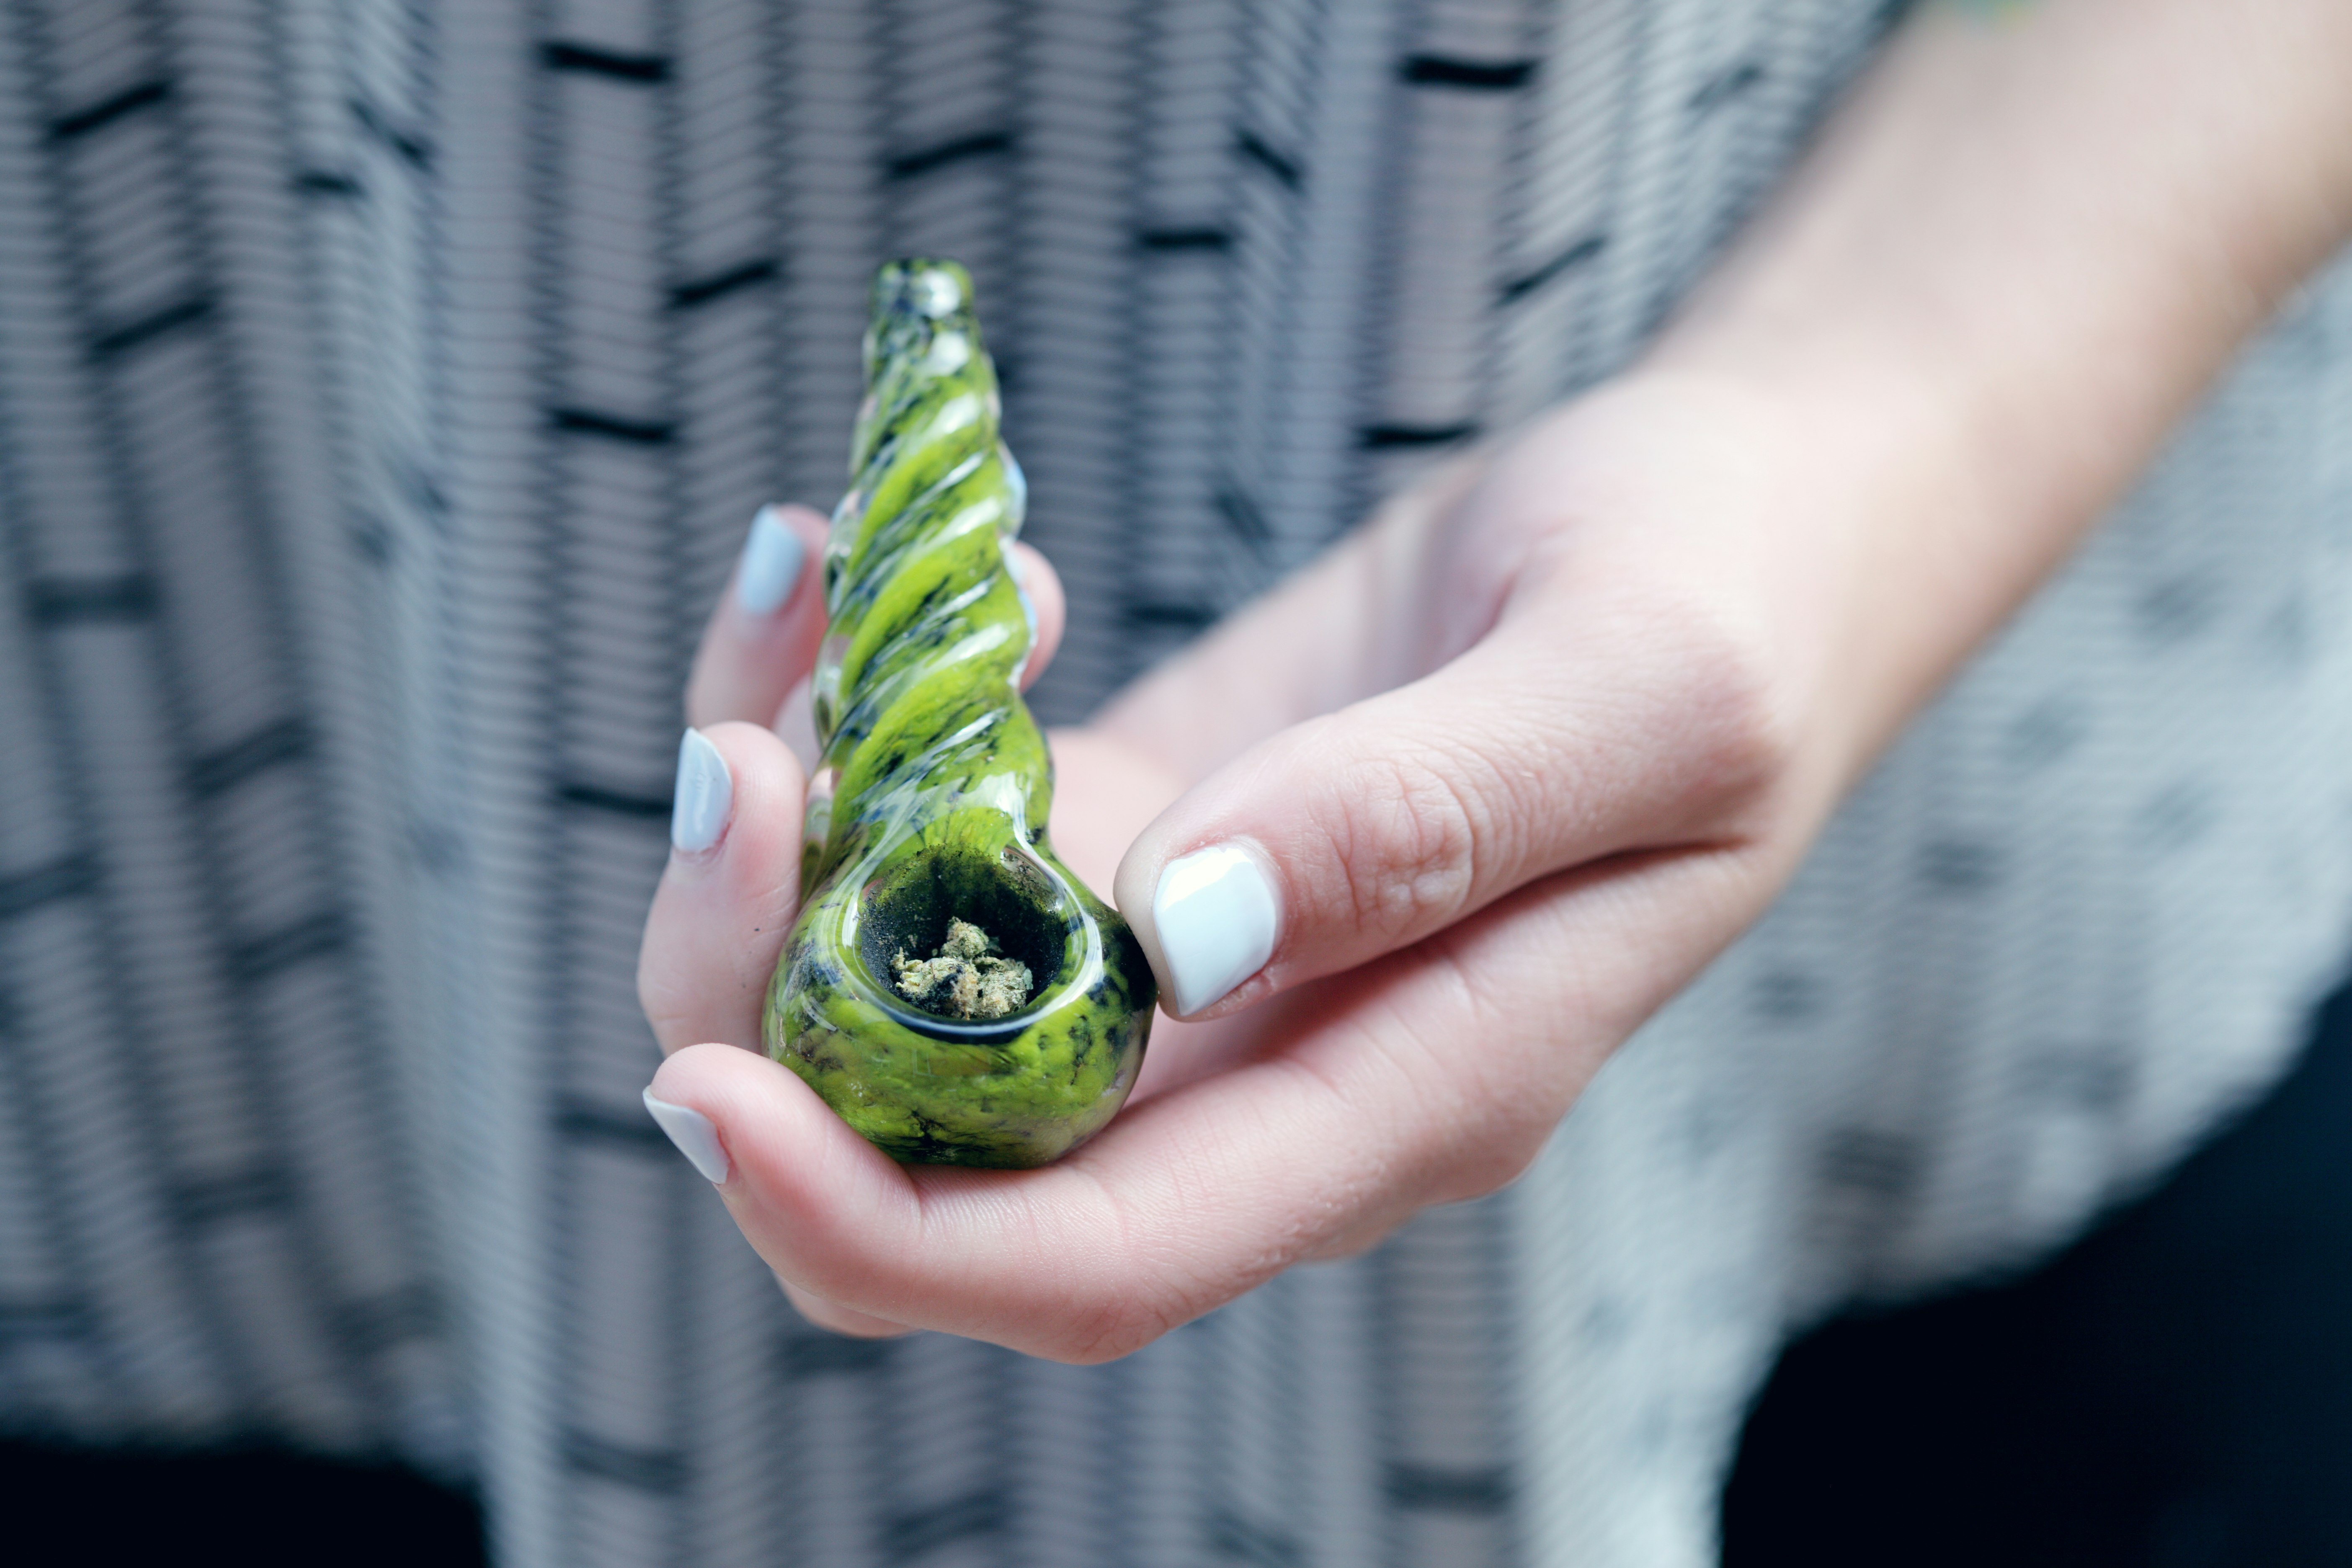 Woman holding a glass cannabis pipe filled with medical grade marijuana.